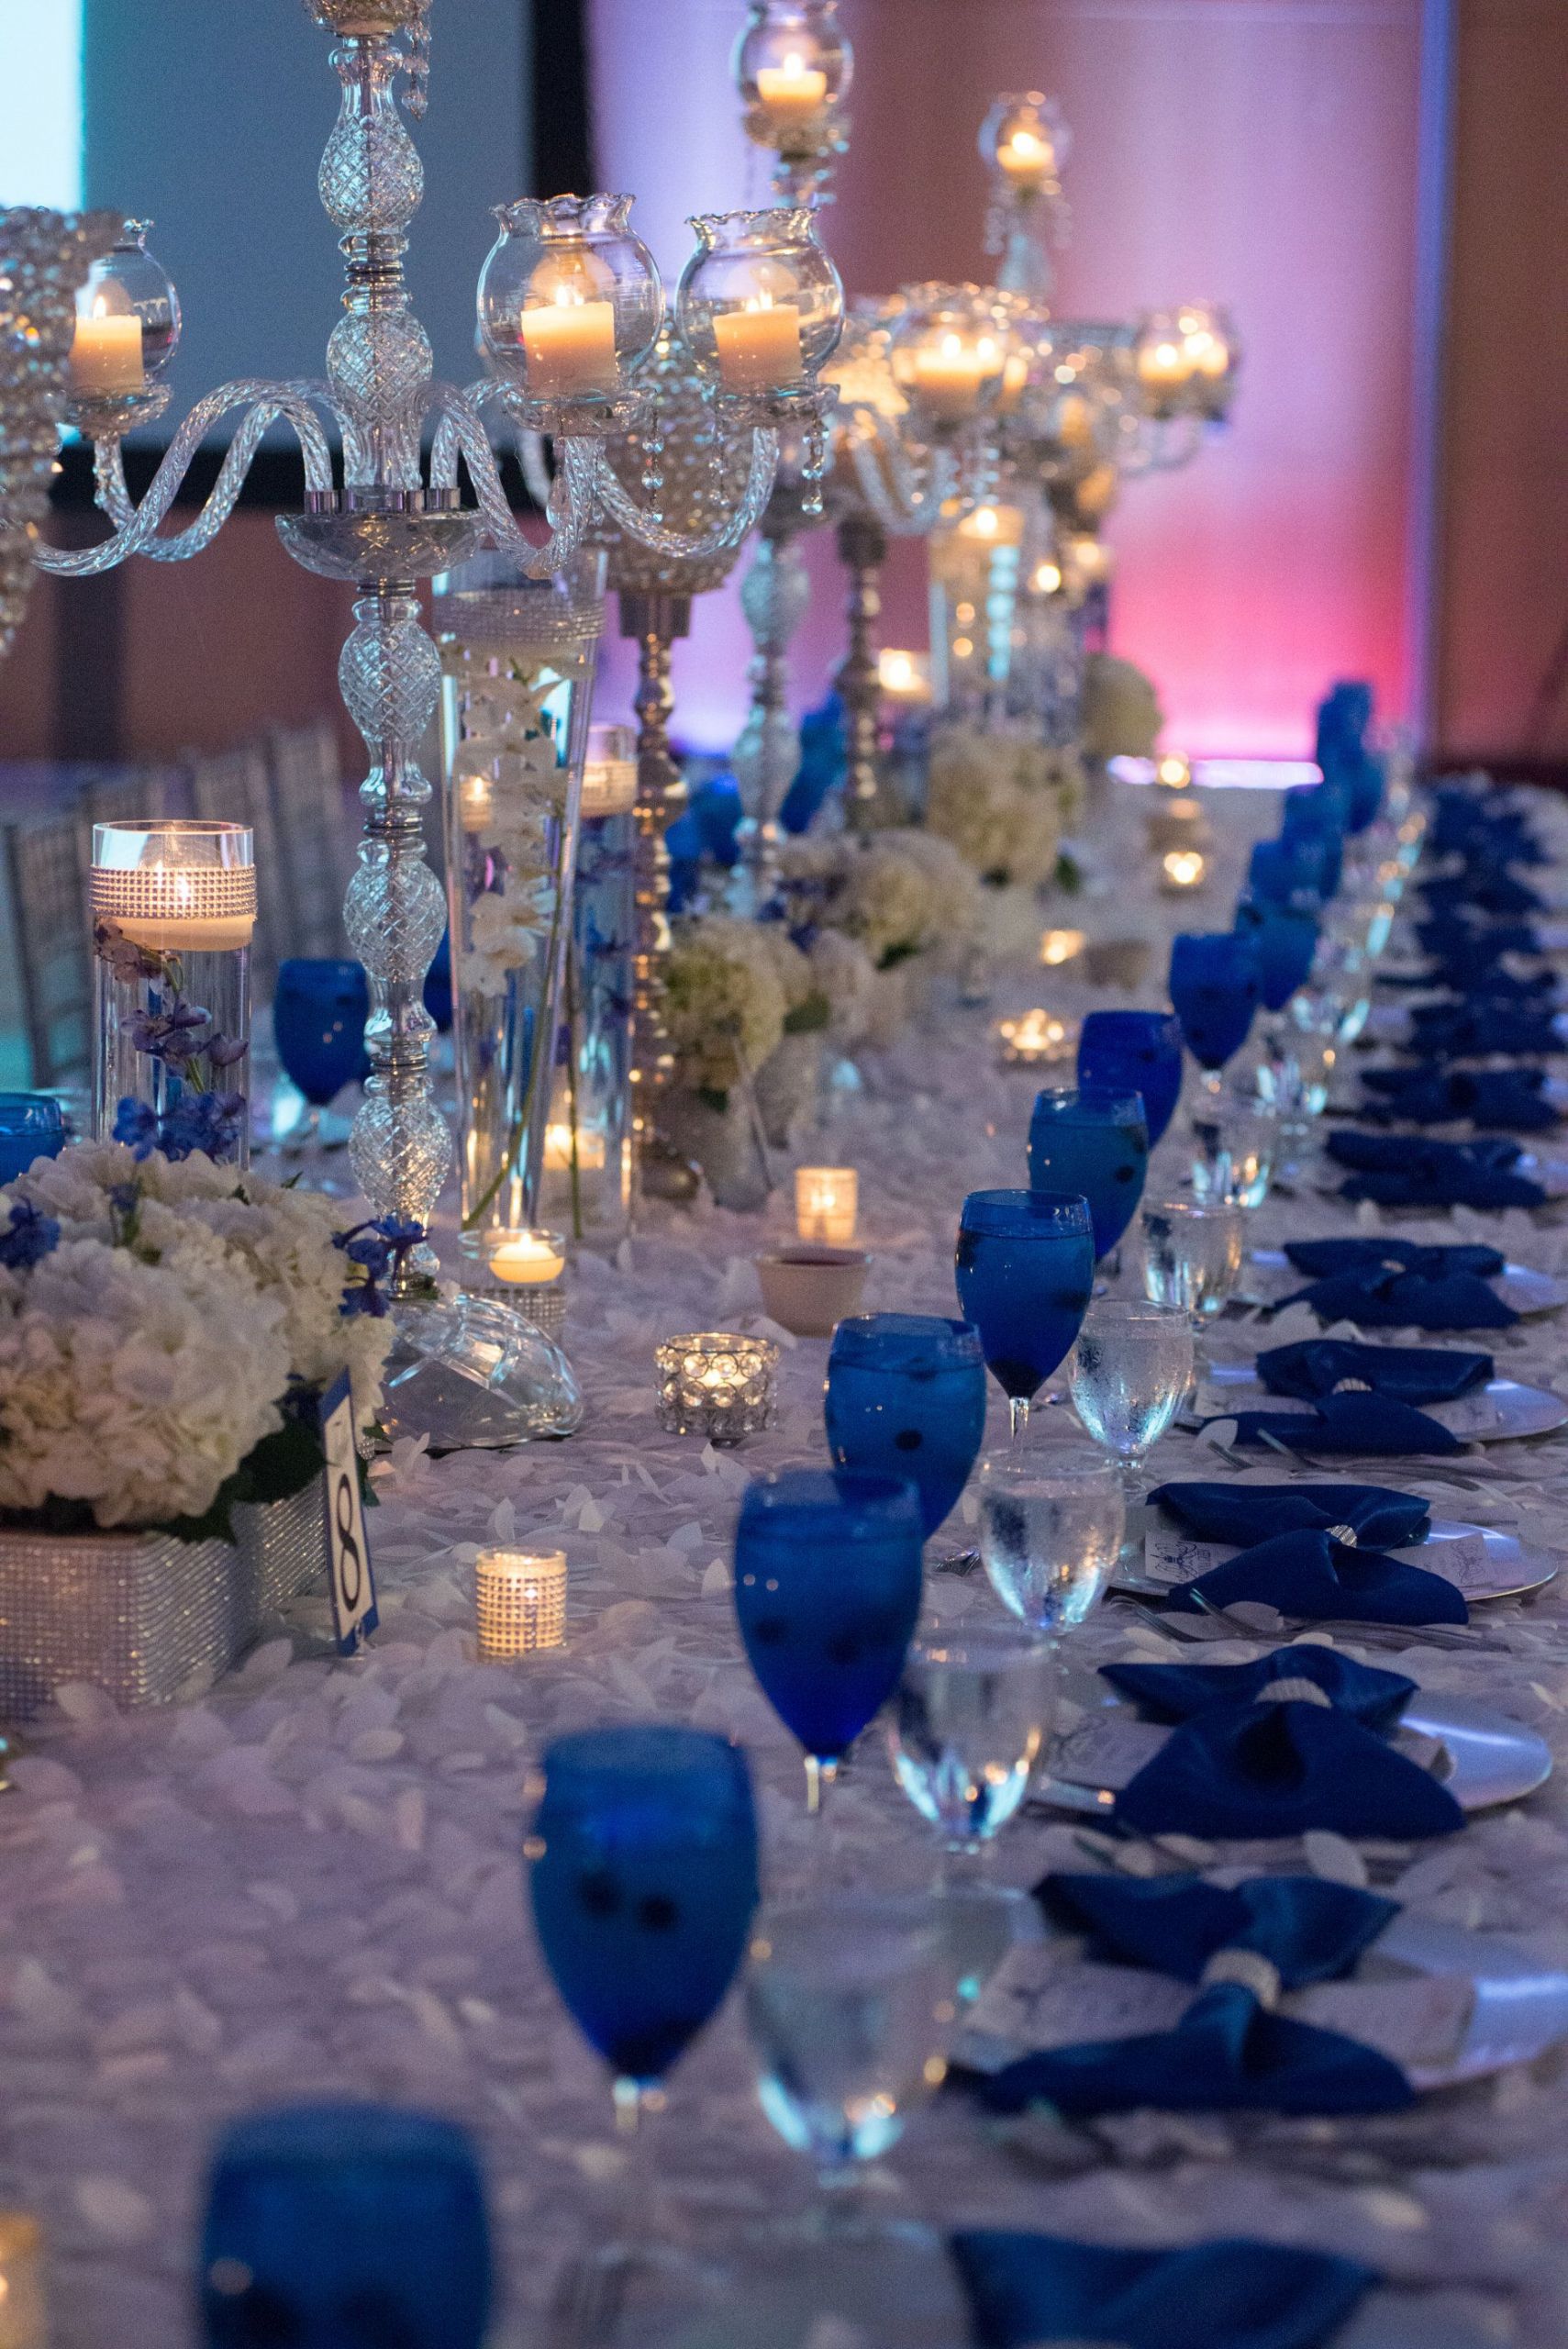 Blue Wedding Table Decorations
 Our Royal Blue Wedding Family Styled Seating Reception